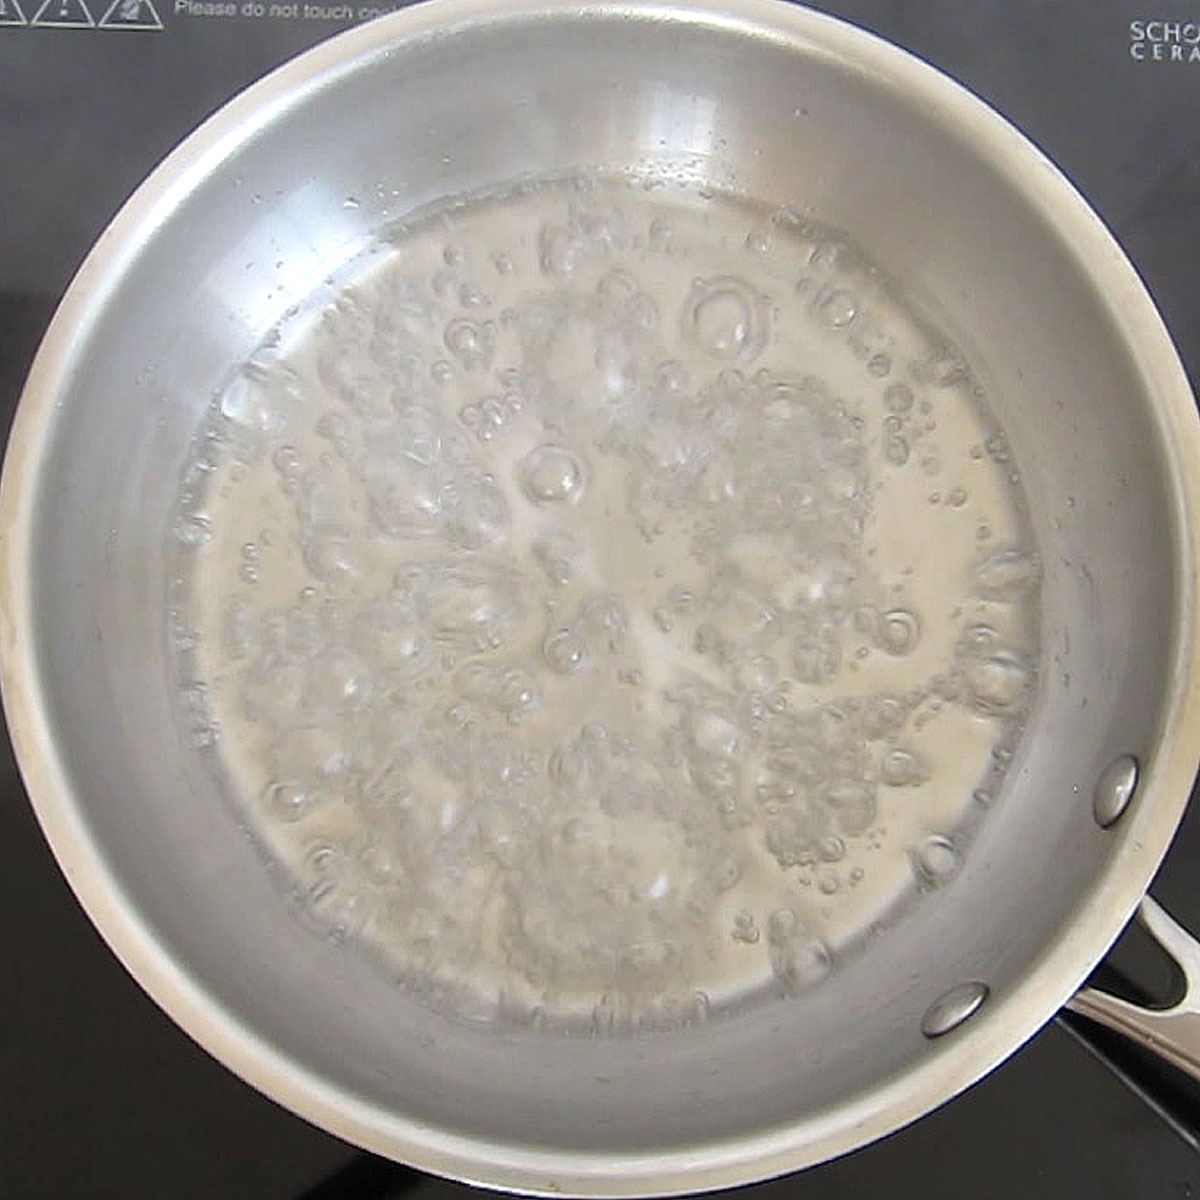 boiling sugar syrup in a skillet